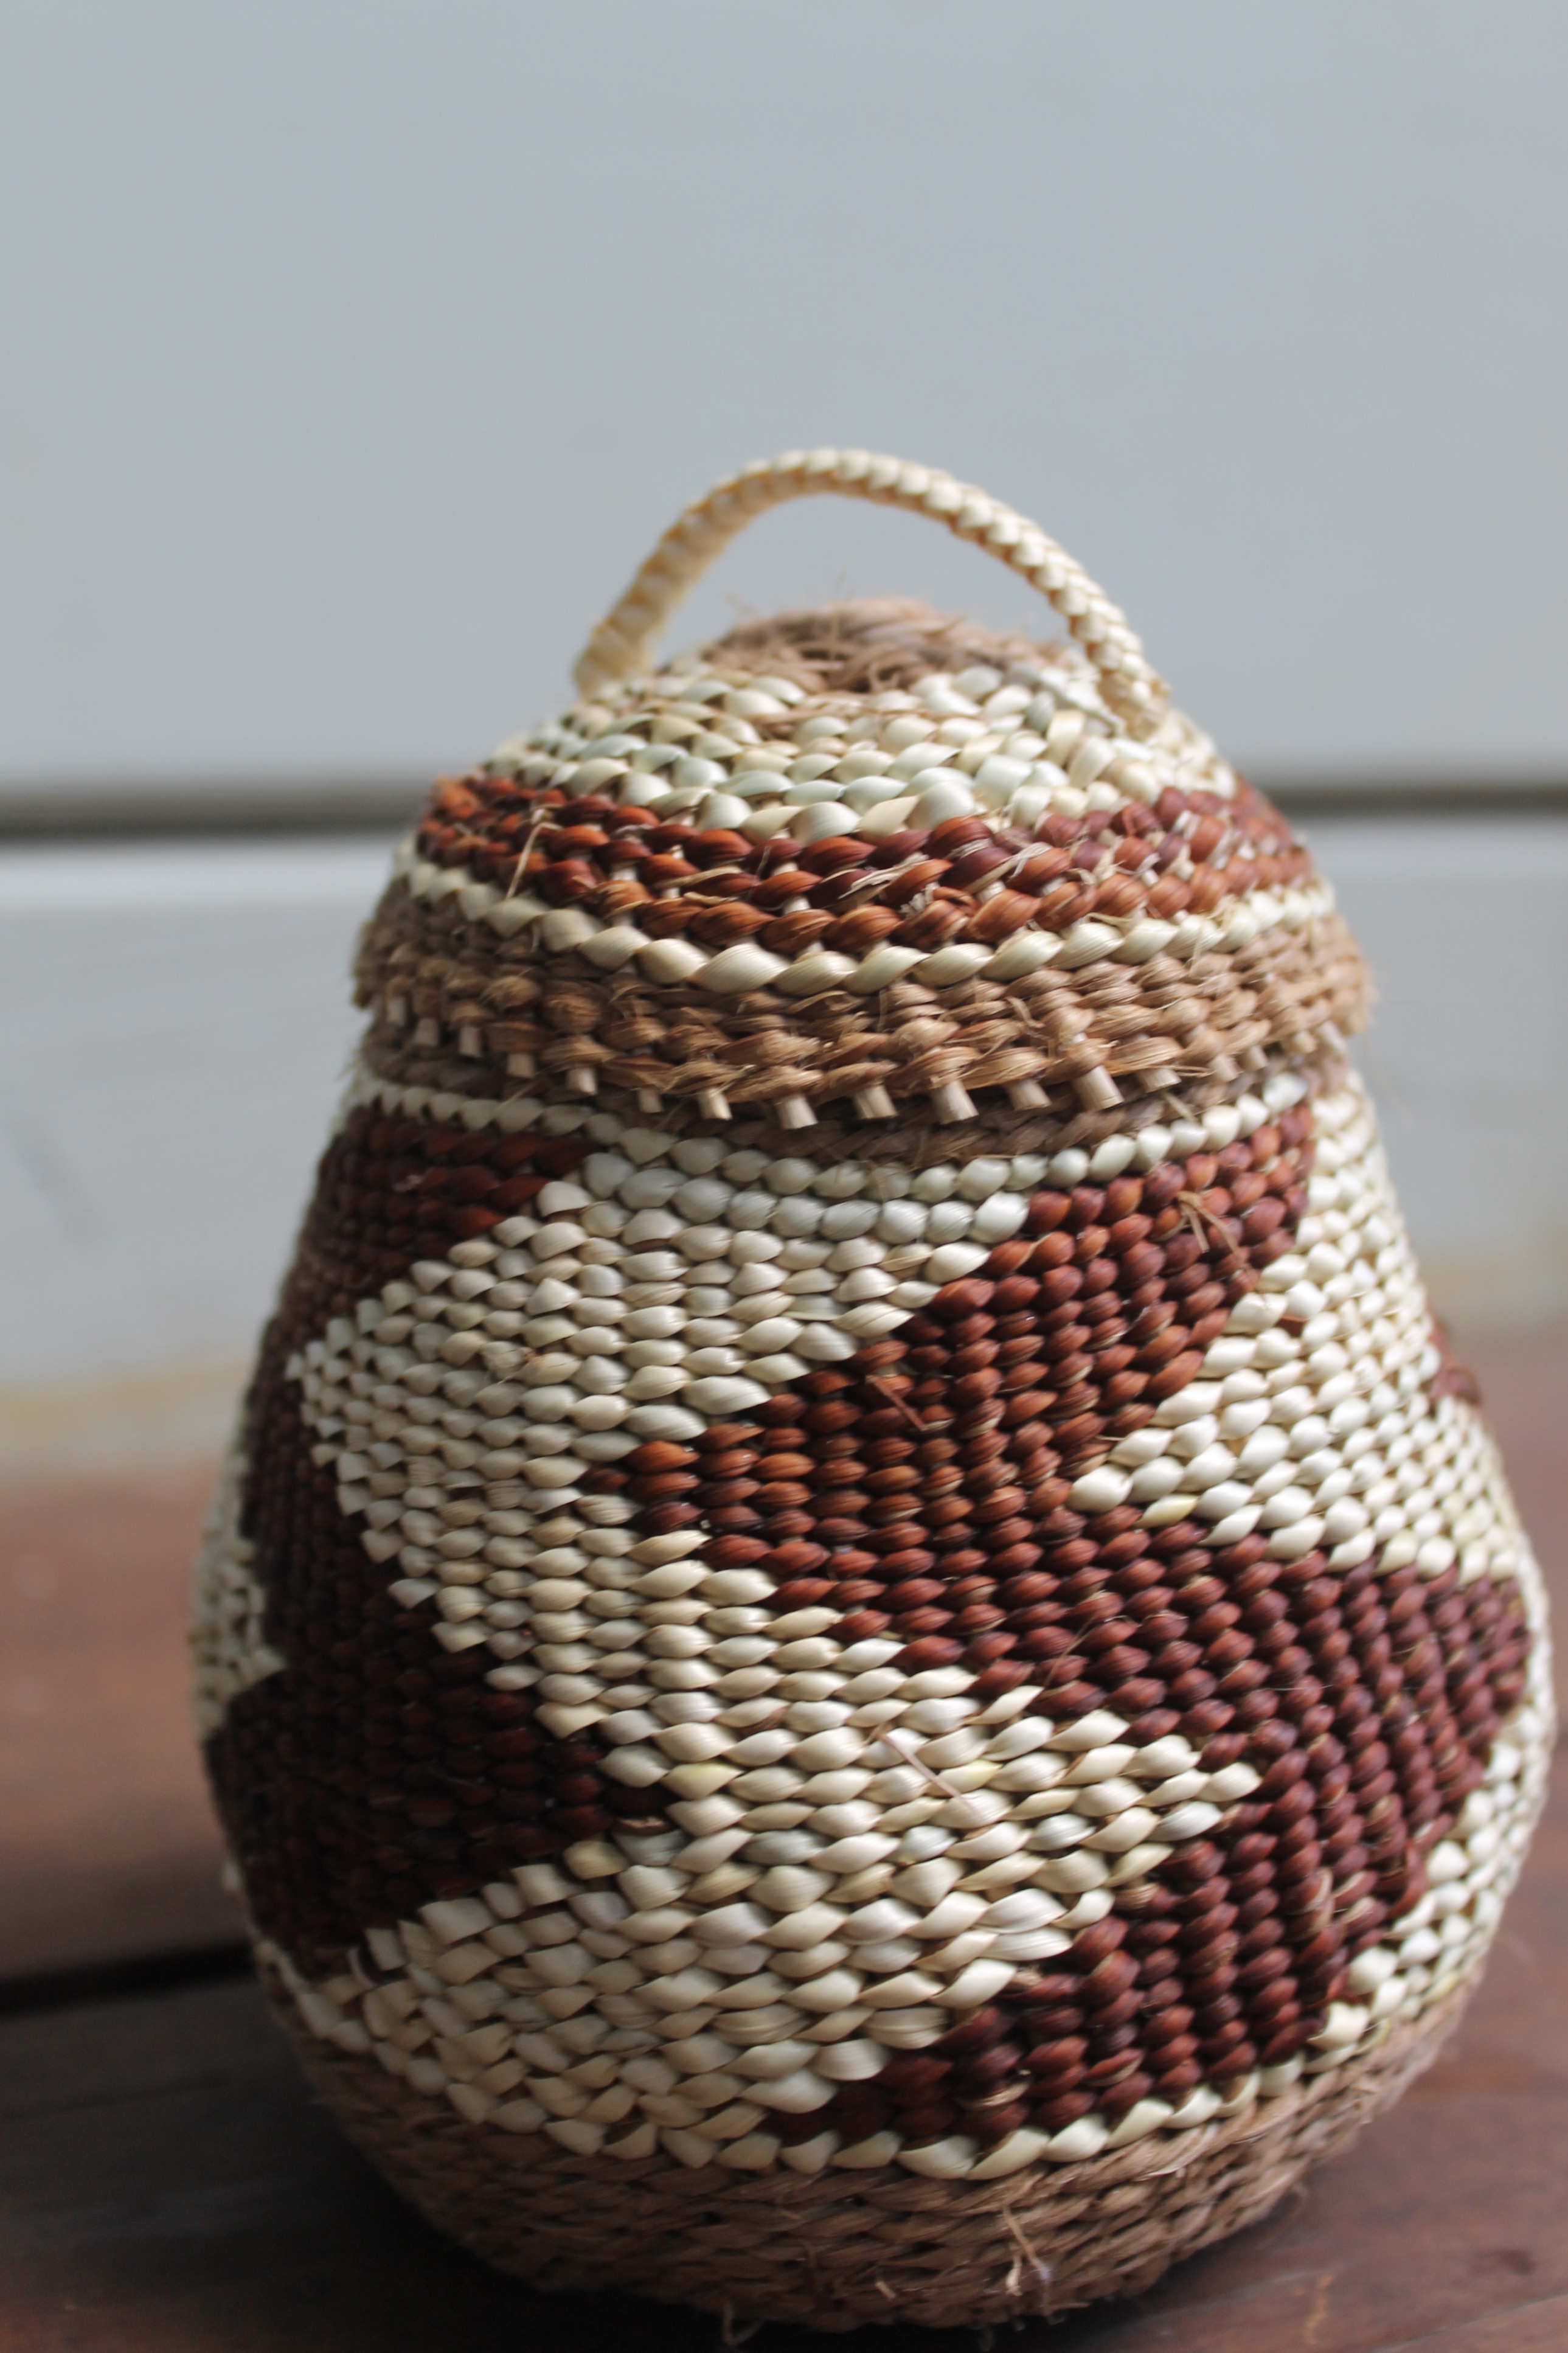 A cone-shaped brown and white woven basket with a zig zag pattern and a lid with a handle on a wooden shelf